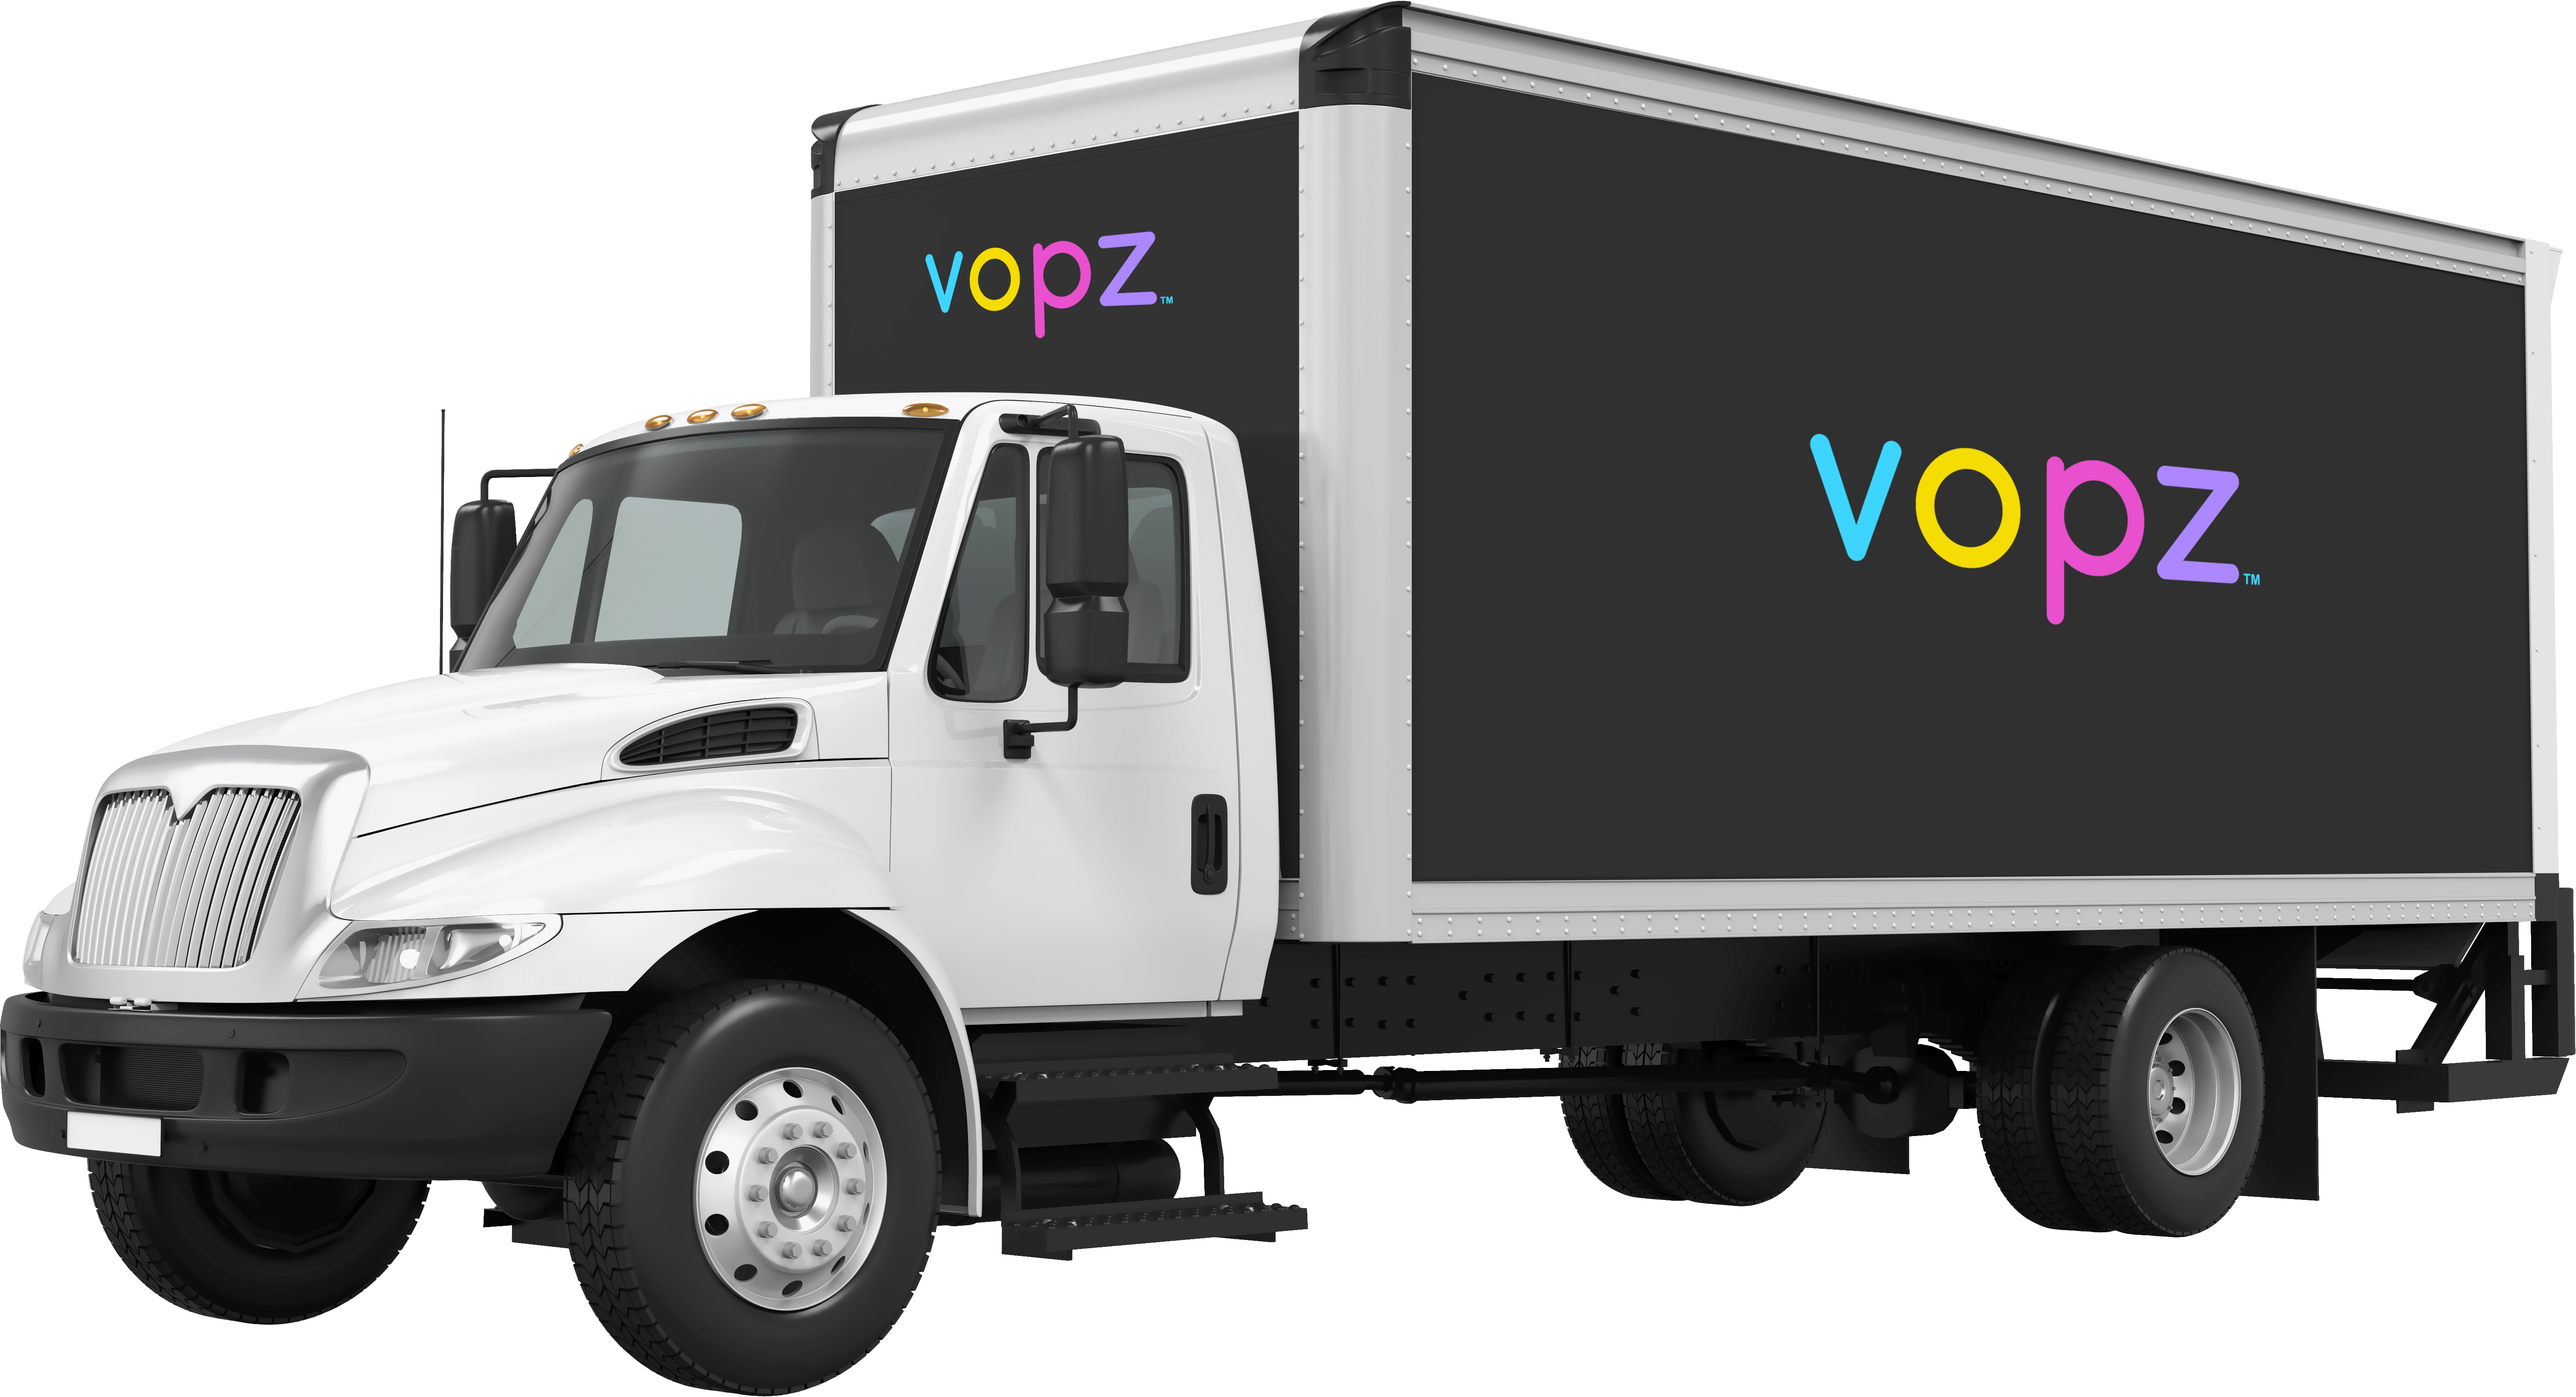 Delivery truck with vopz main logo displayed on the side of the truck